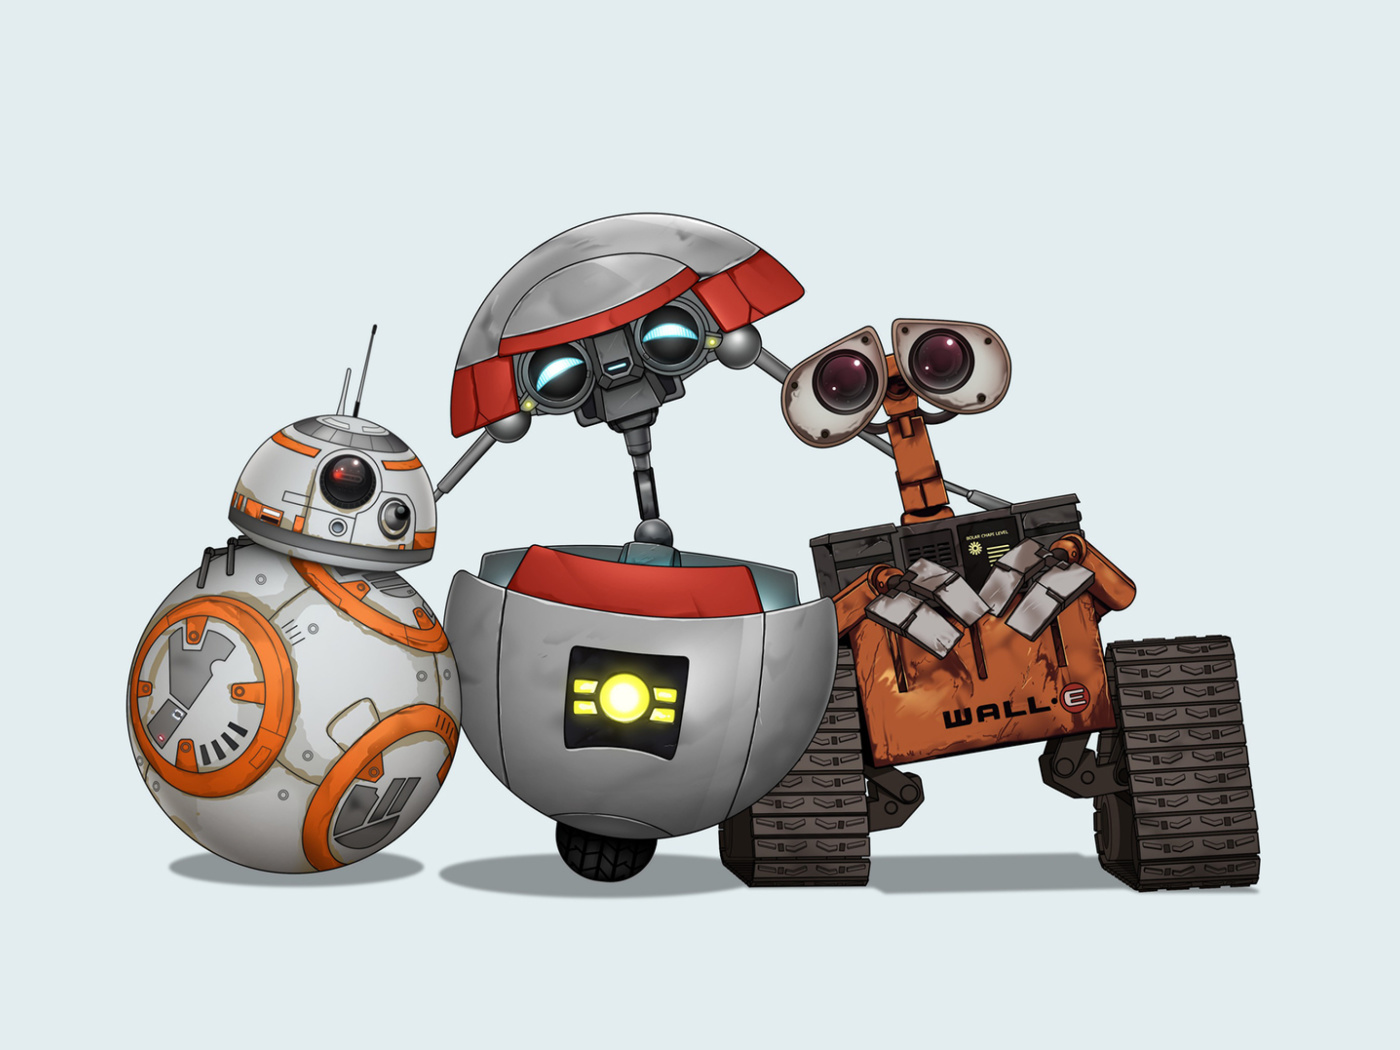 Star Wars and Walle wallpaper 1400x1050